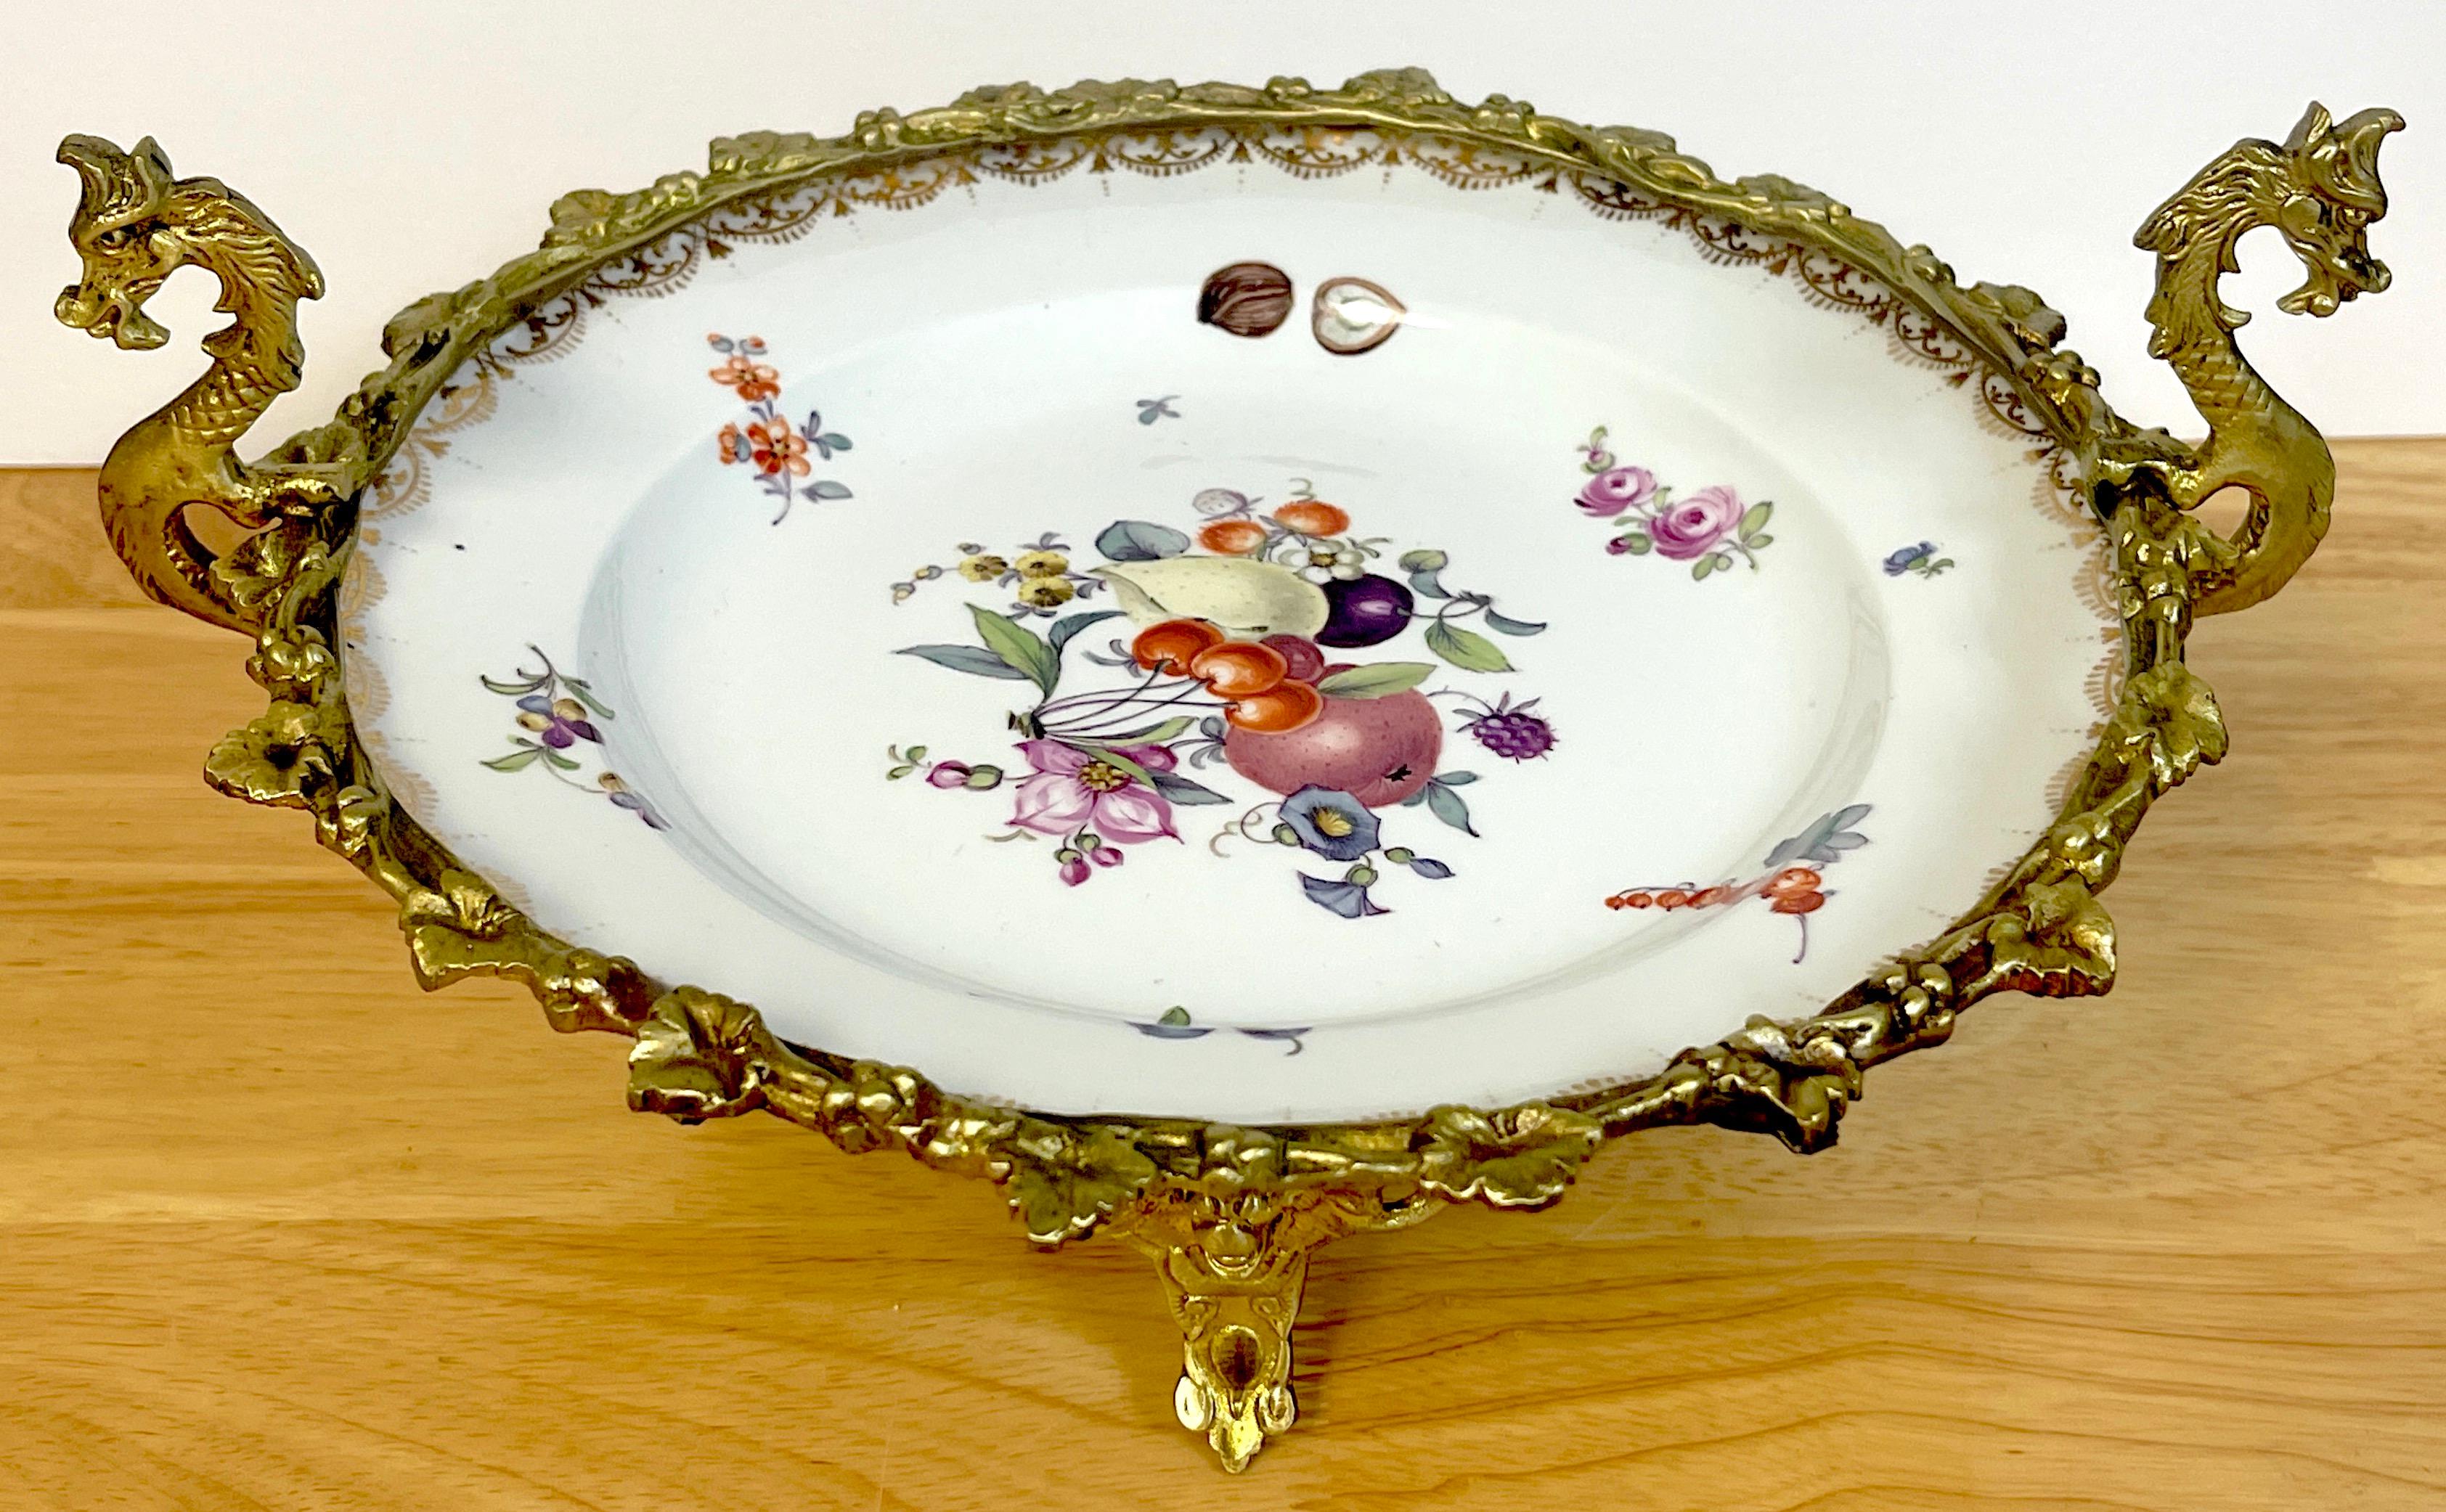 19th C Meissen Fruit & Flower Motif Ormolu Mounted Tazza, The Meissen porcelain (possibly late 18th century) finely decorated with various fruits, nuts, and flowers. Held in a twin handled griffin motif grape encrusted footed ormolu frame.